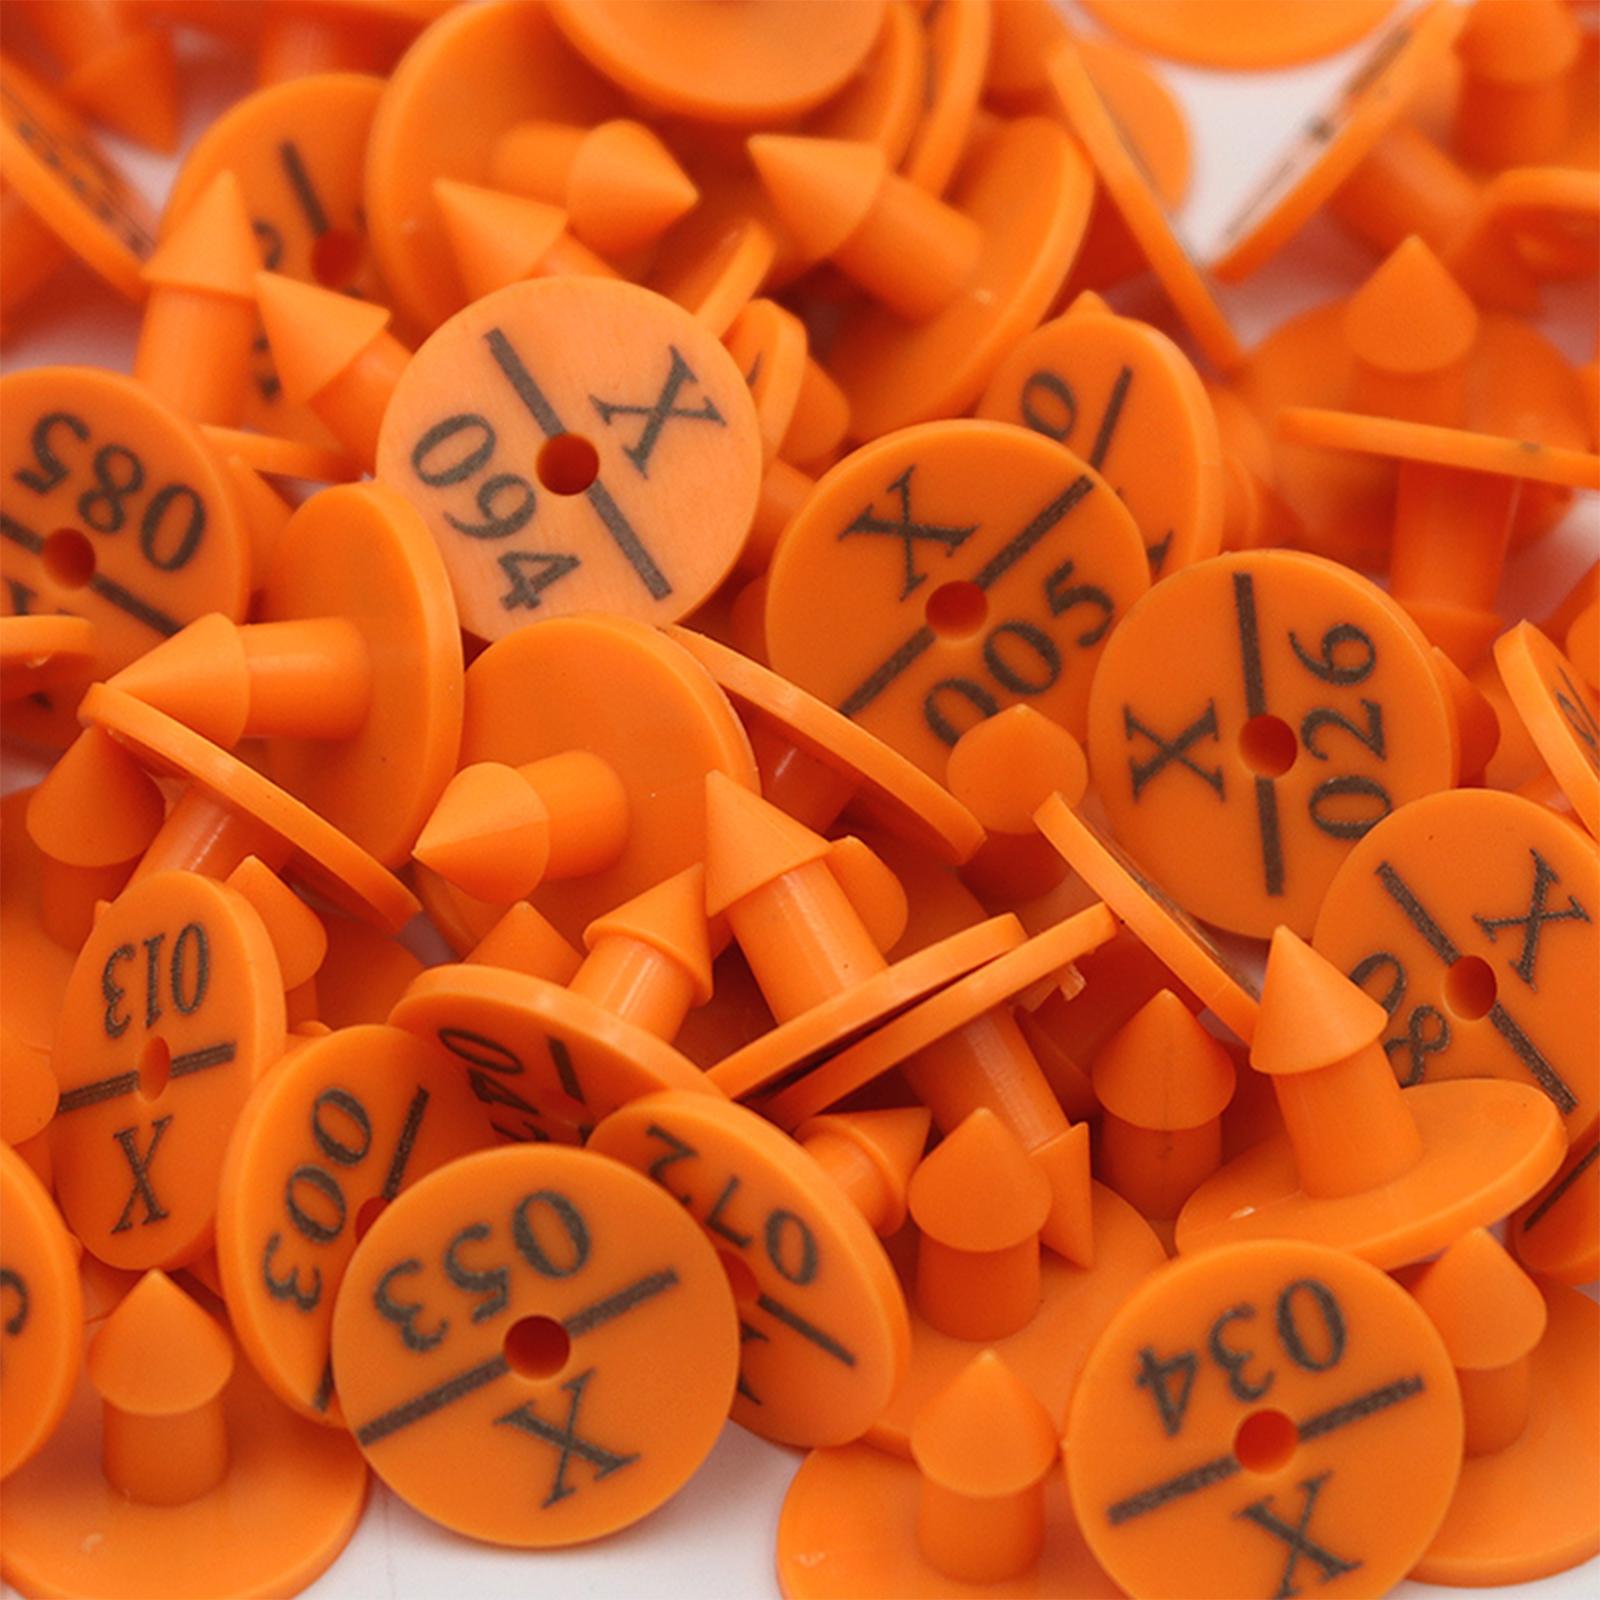 100Pcs Numbered Ear Tag Earrings for Rabbit Cow Cattle Pigs Calf Hogs Sheep Orange